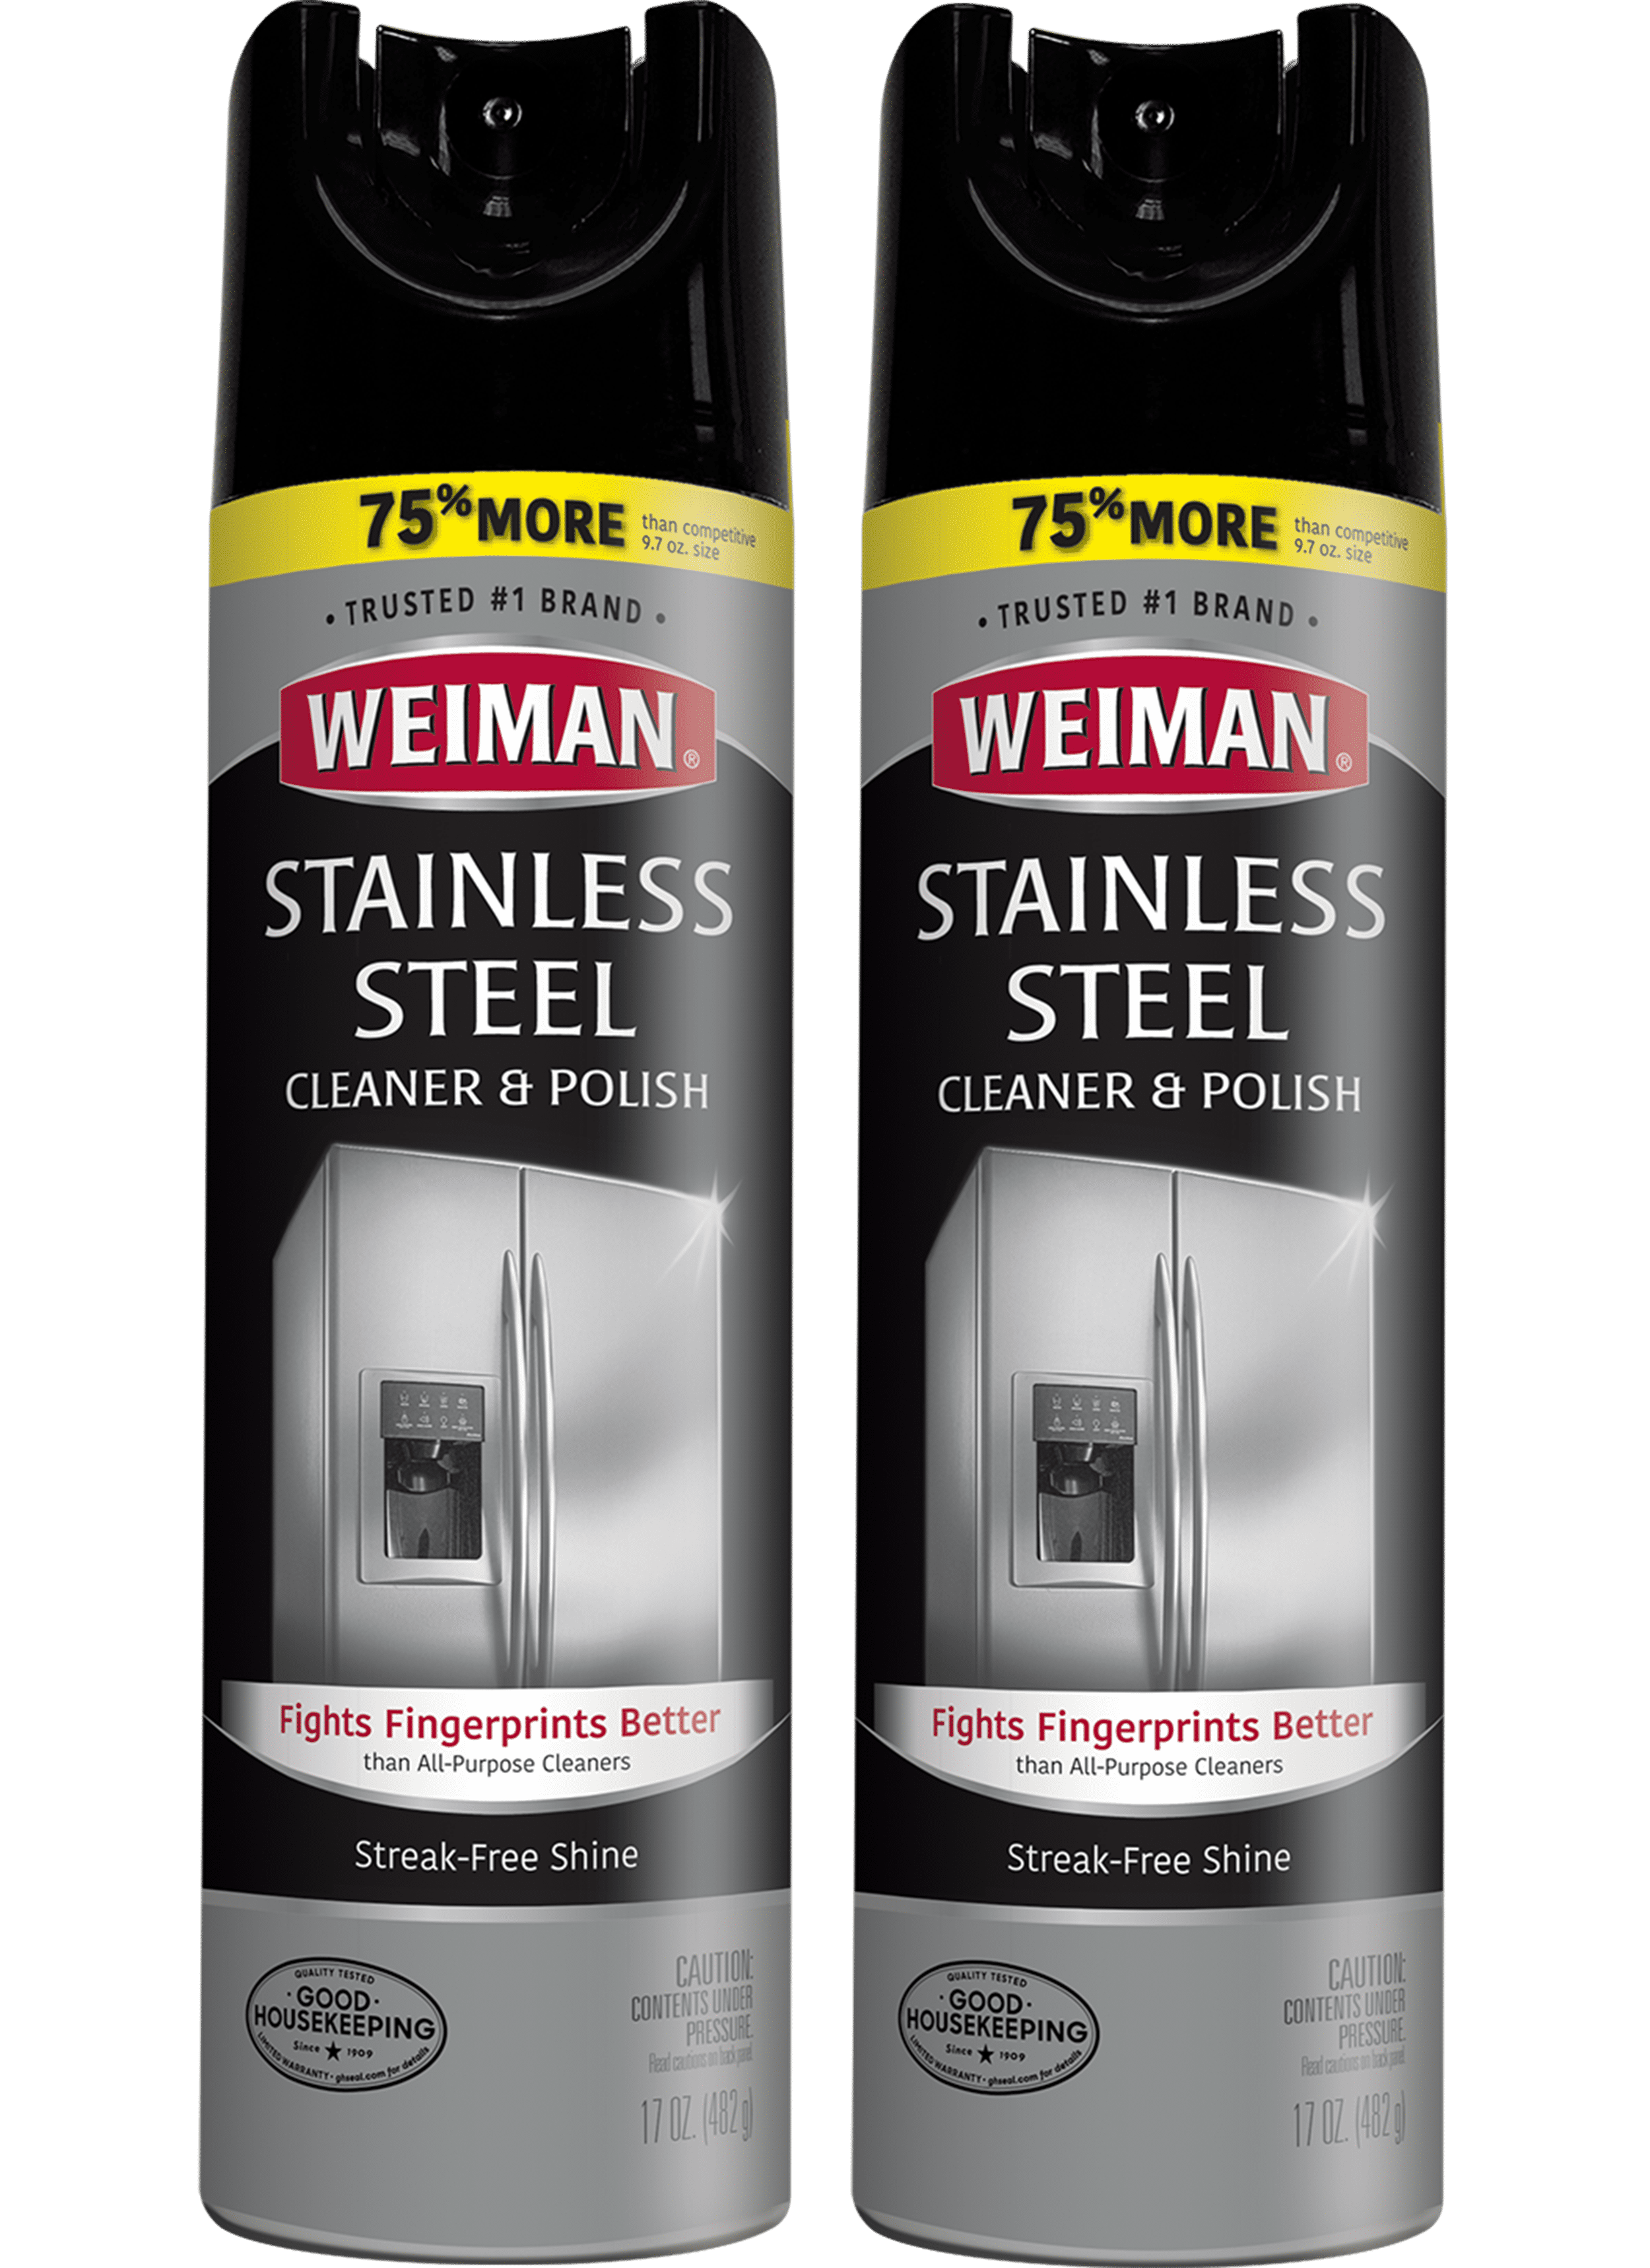 Weiman Jewelry Polish Cleaner and Tarnish Remover Wipes - 20 Count